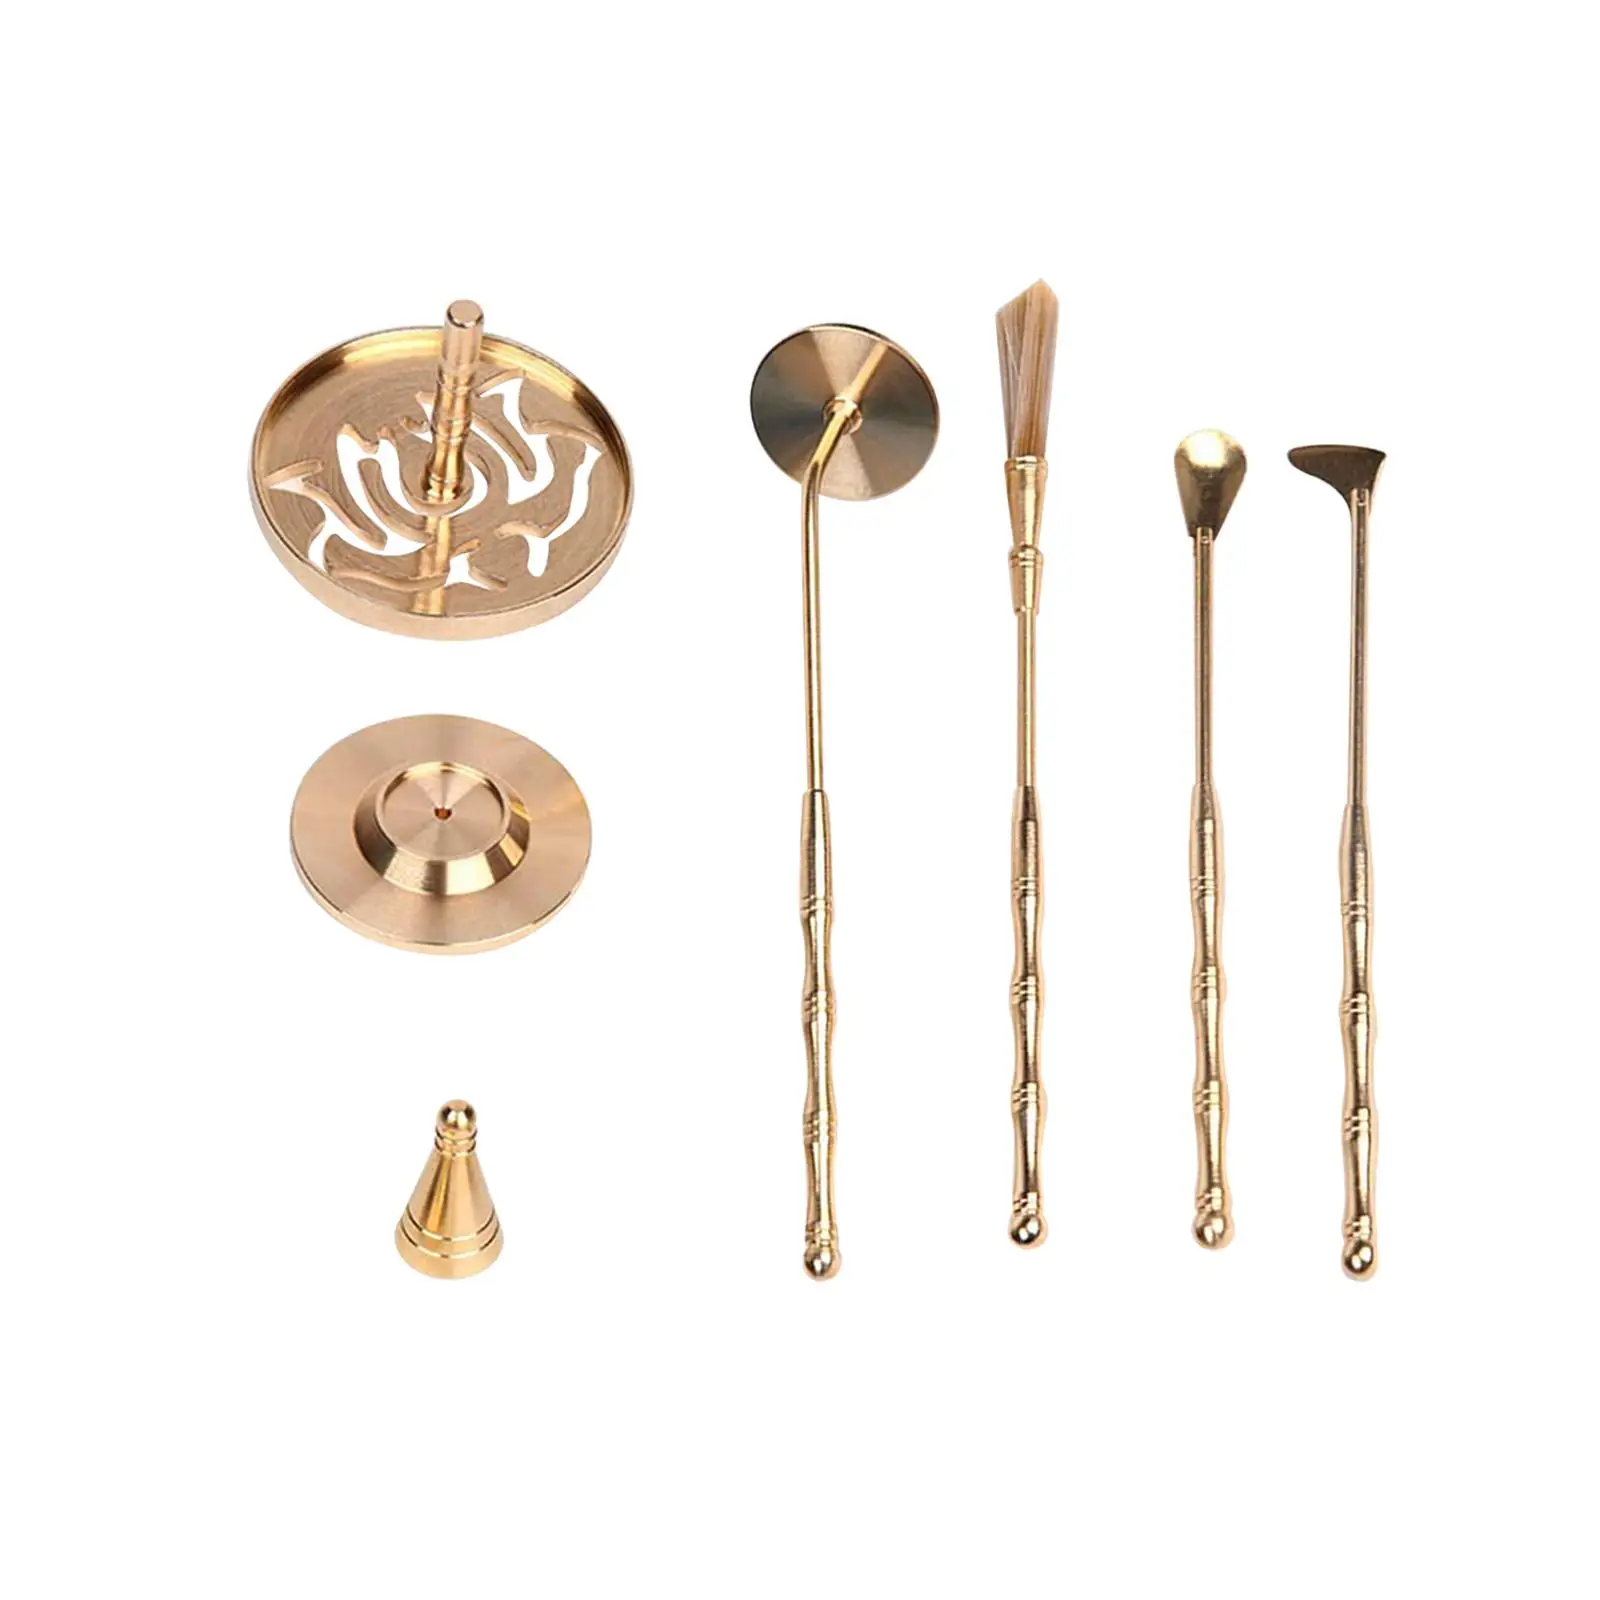 Incense Making Home Decorations Ash Press Temple Portable Incense Spoon DIY Craft Censer Tool Set for Yoga Holidays Gift Party